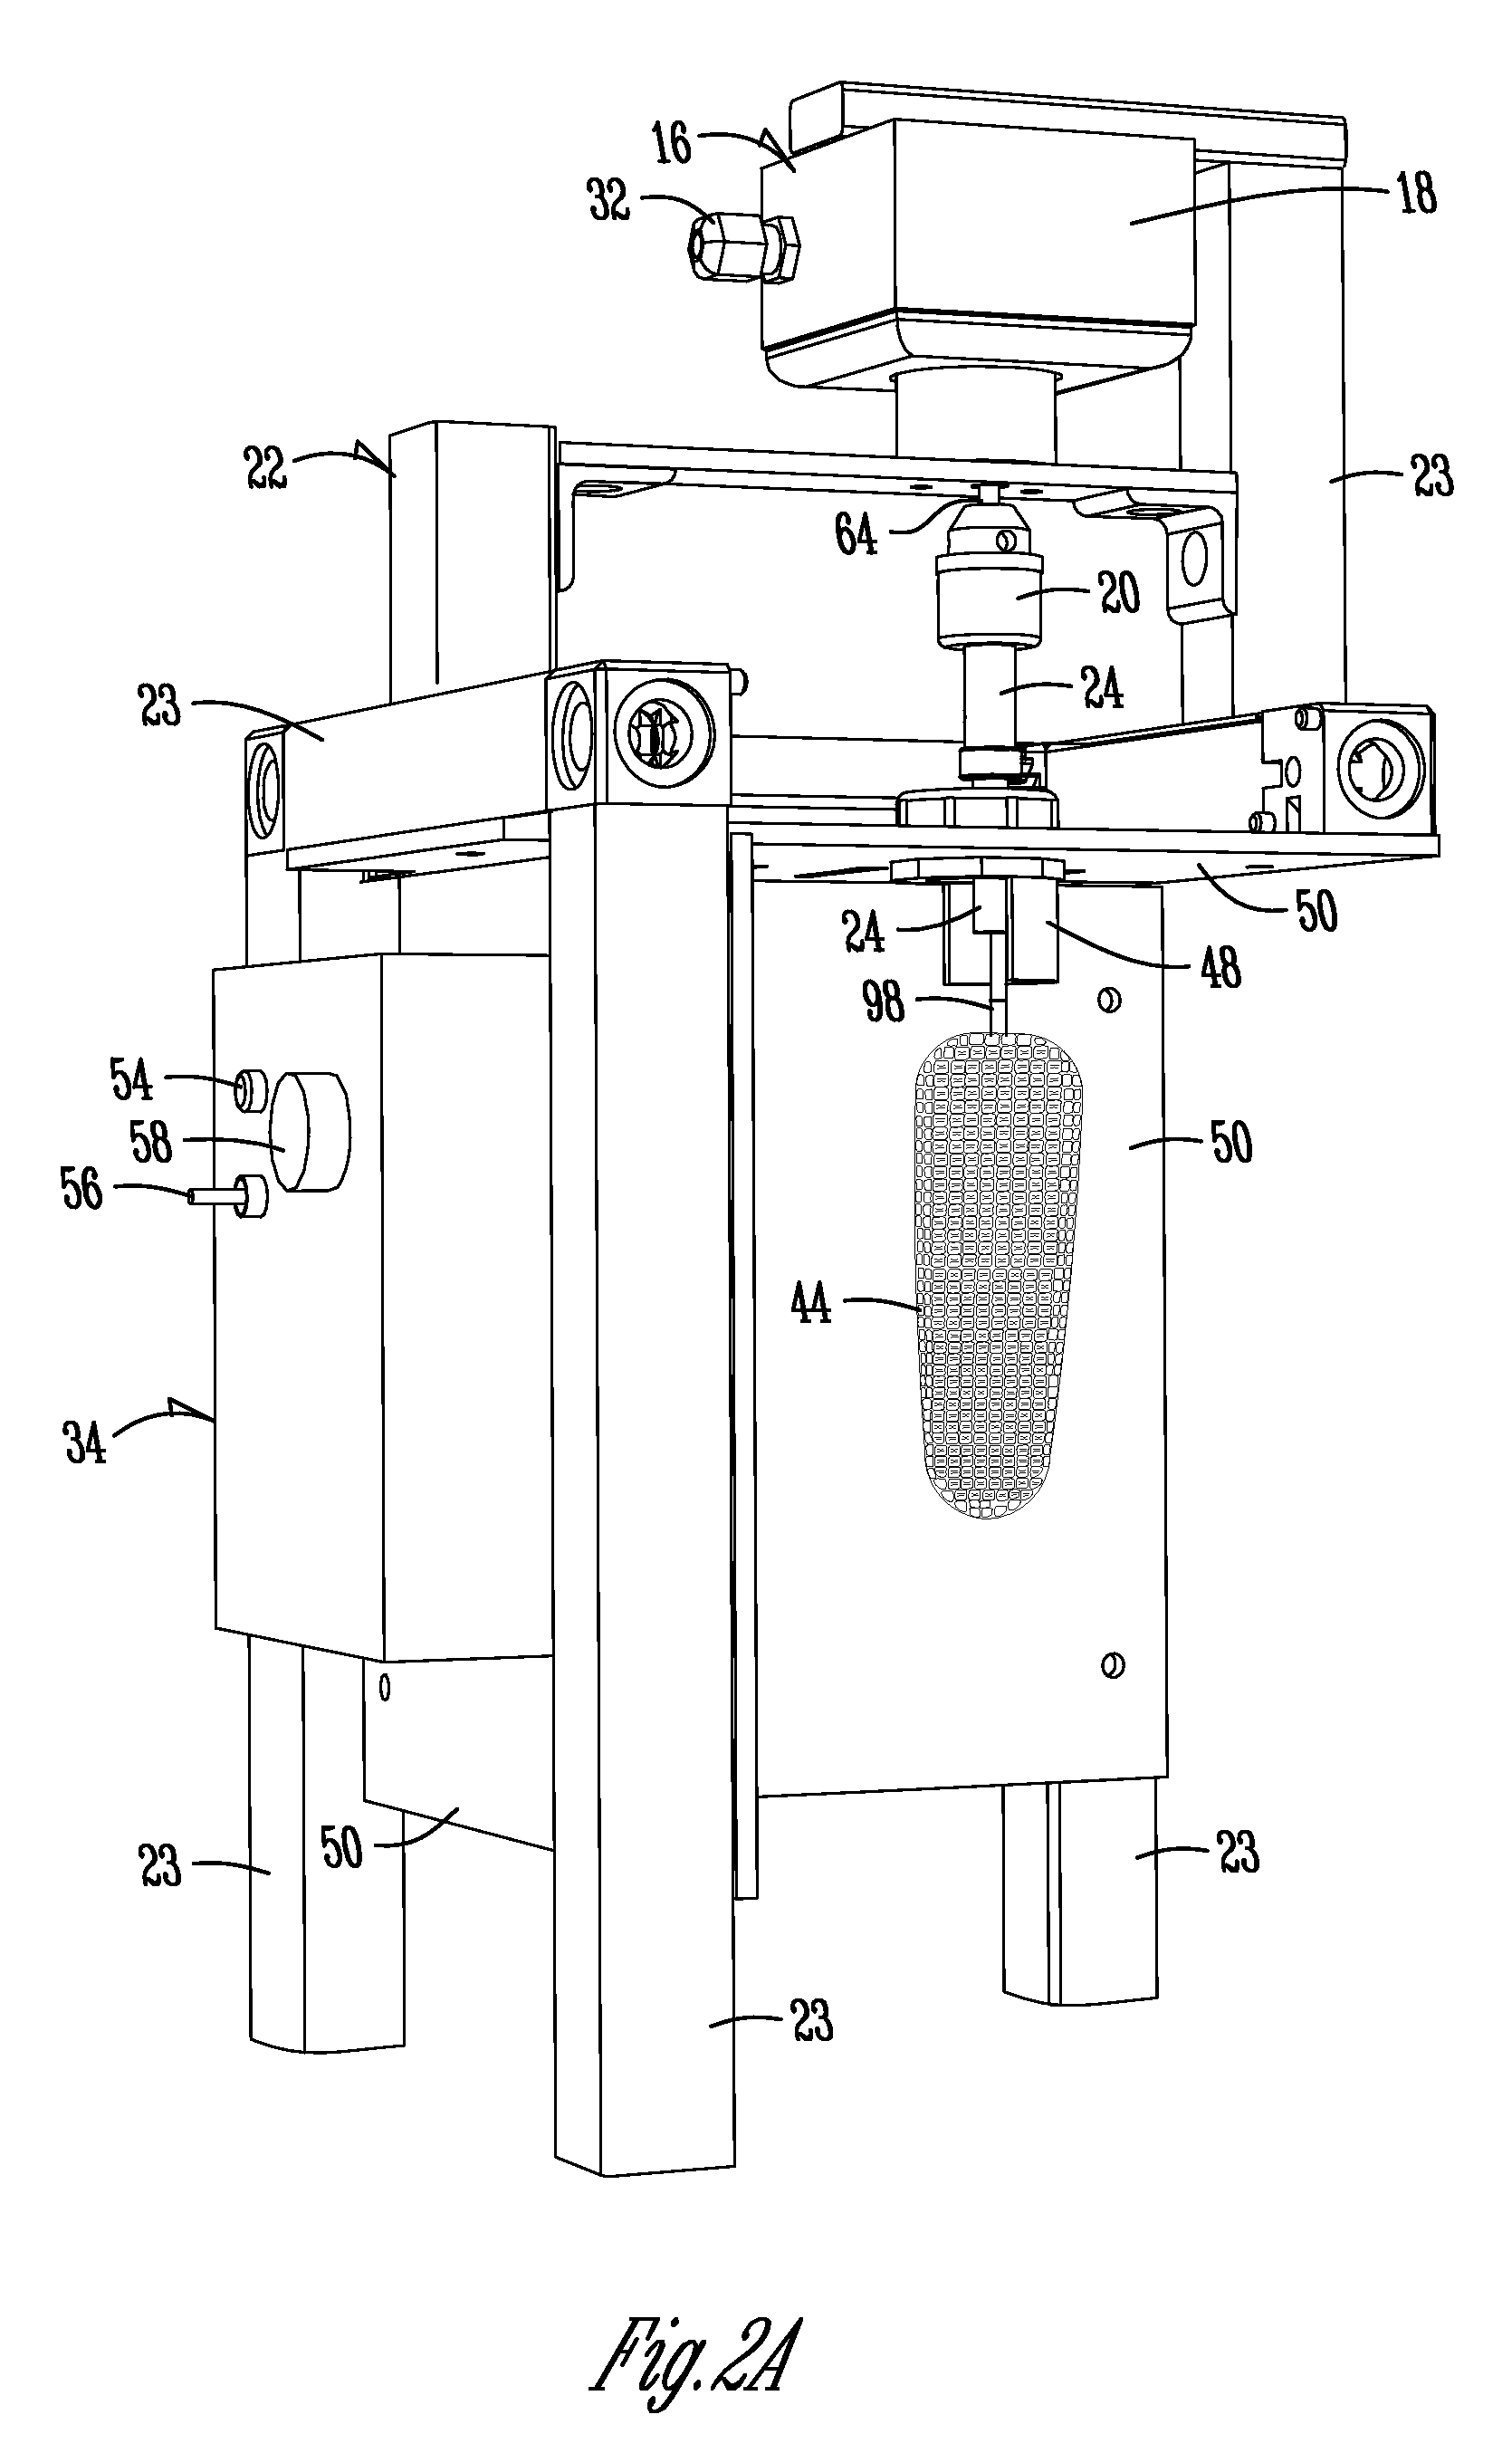 Apparatus and method for coating ears of corn